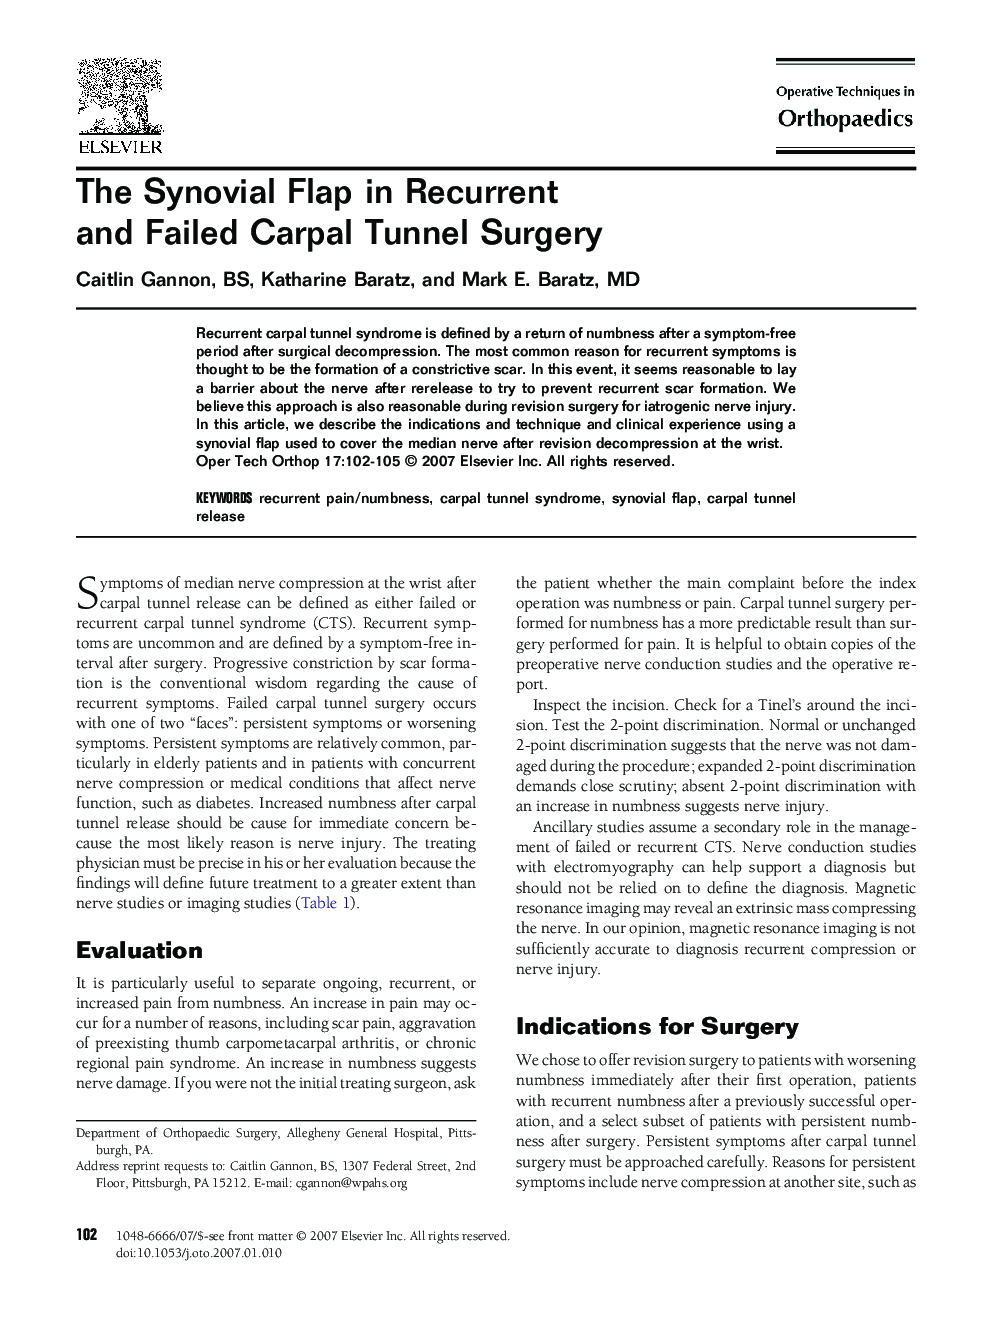 The Synovial Flap in Recurrent and Failed Carpal Tunnel Surgery